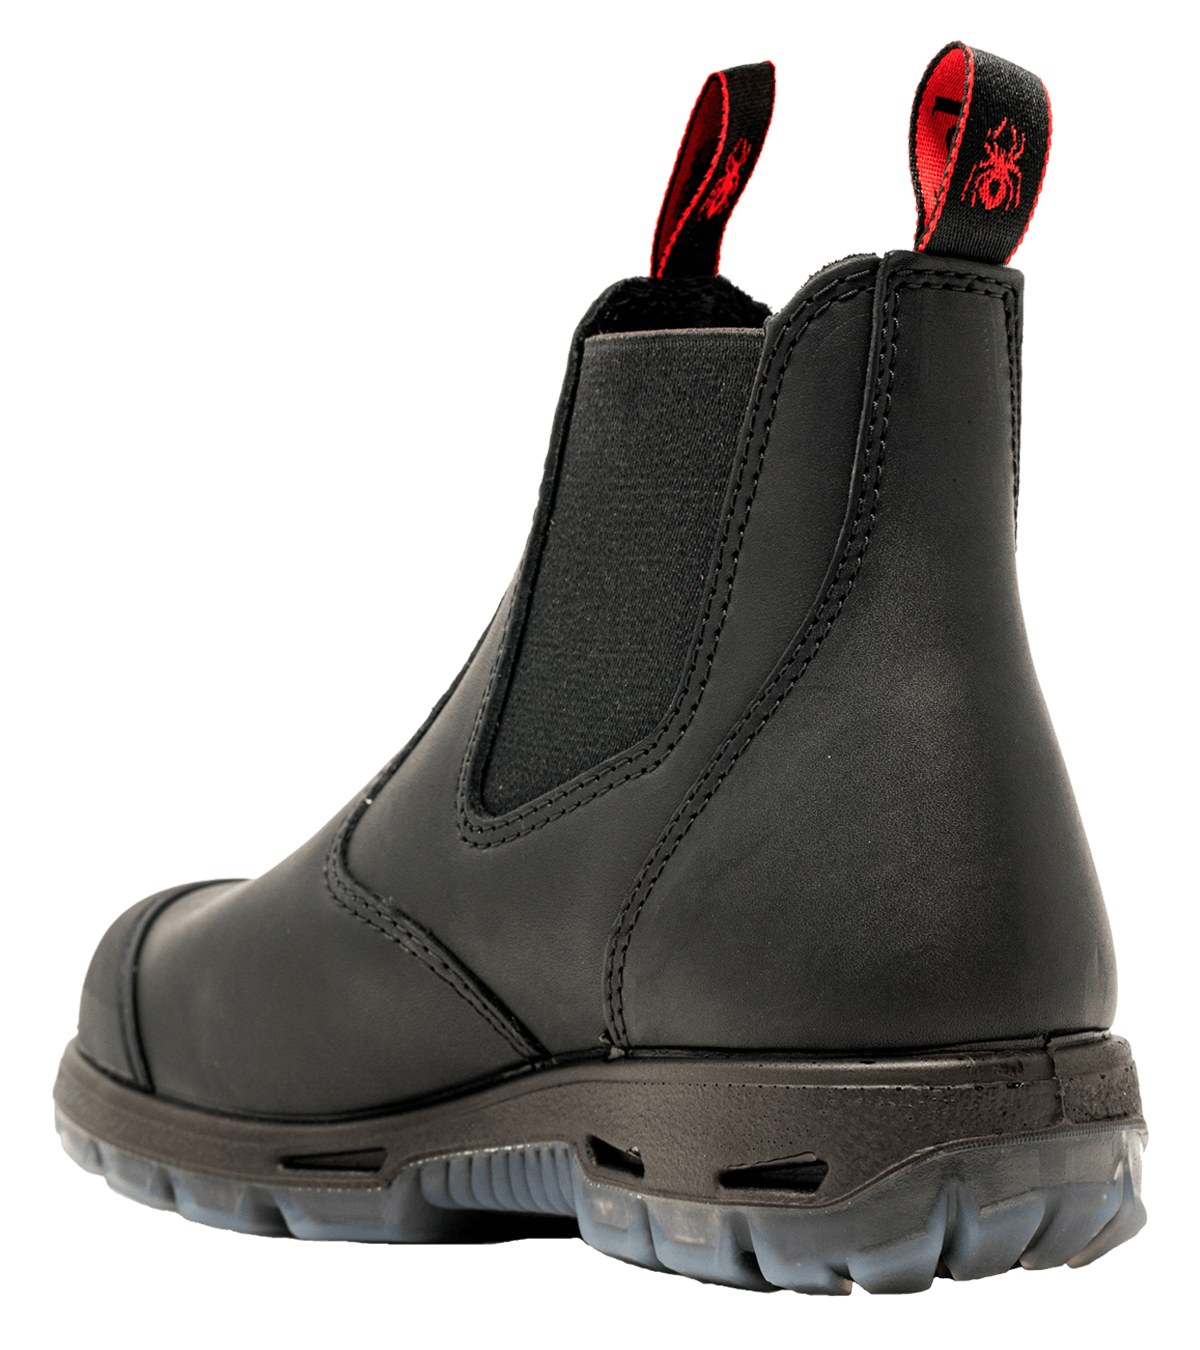 Black leather safety boot by Redback 